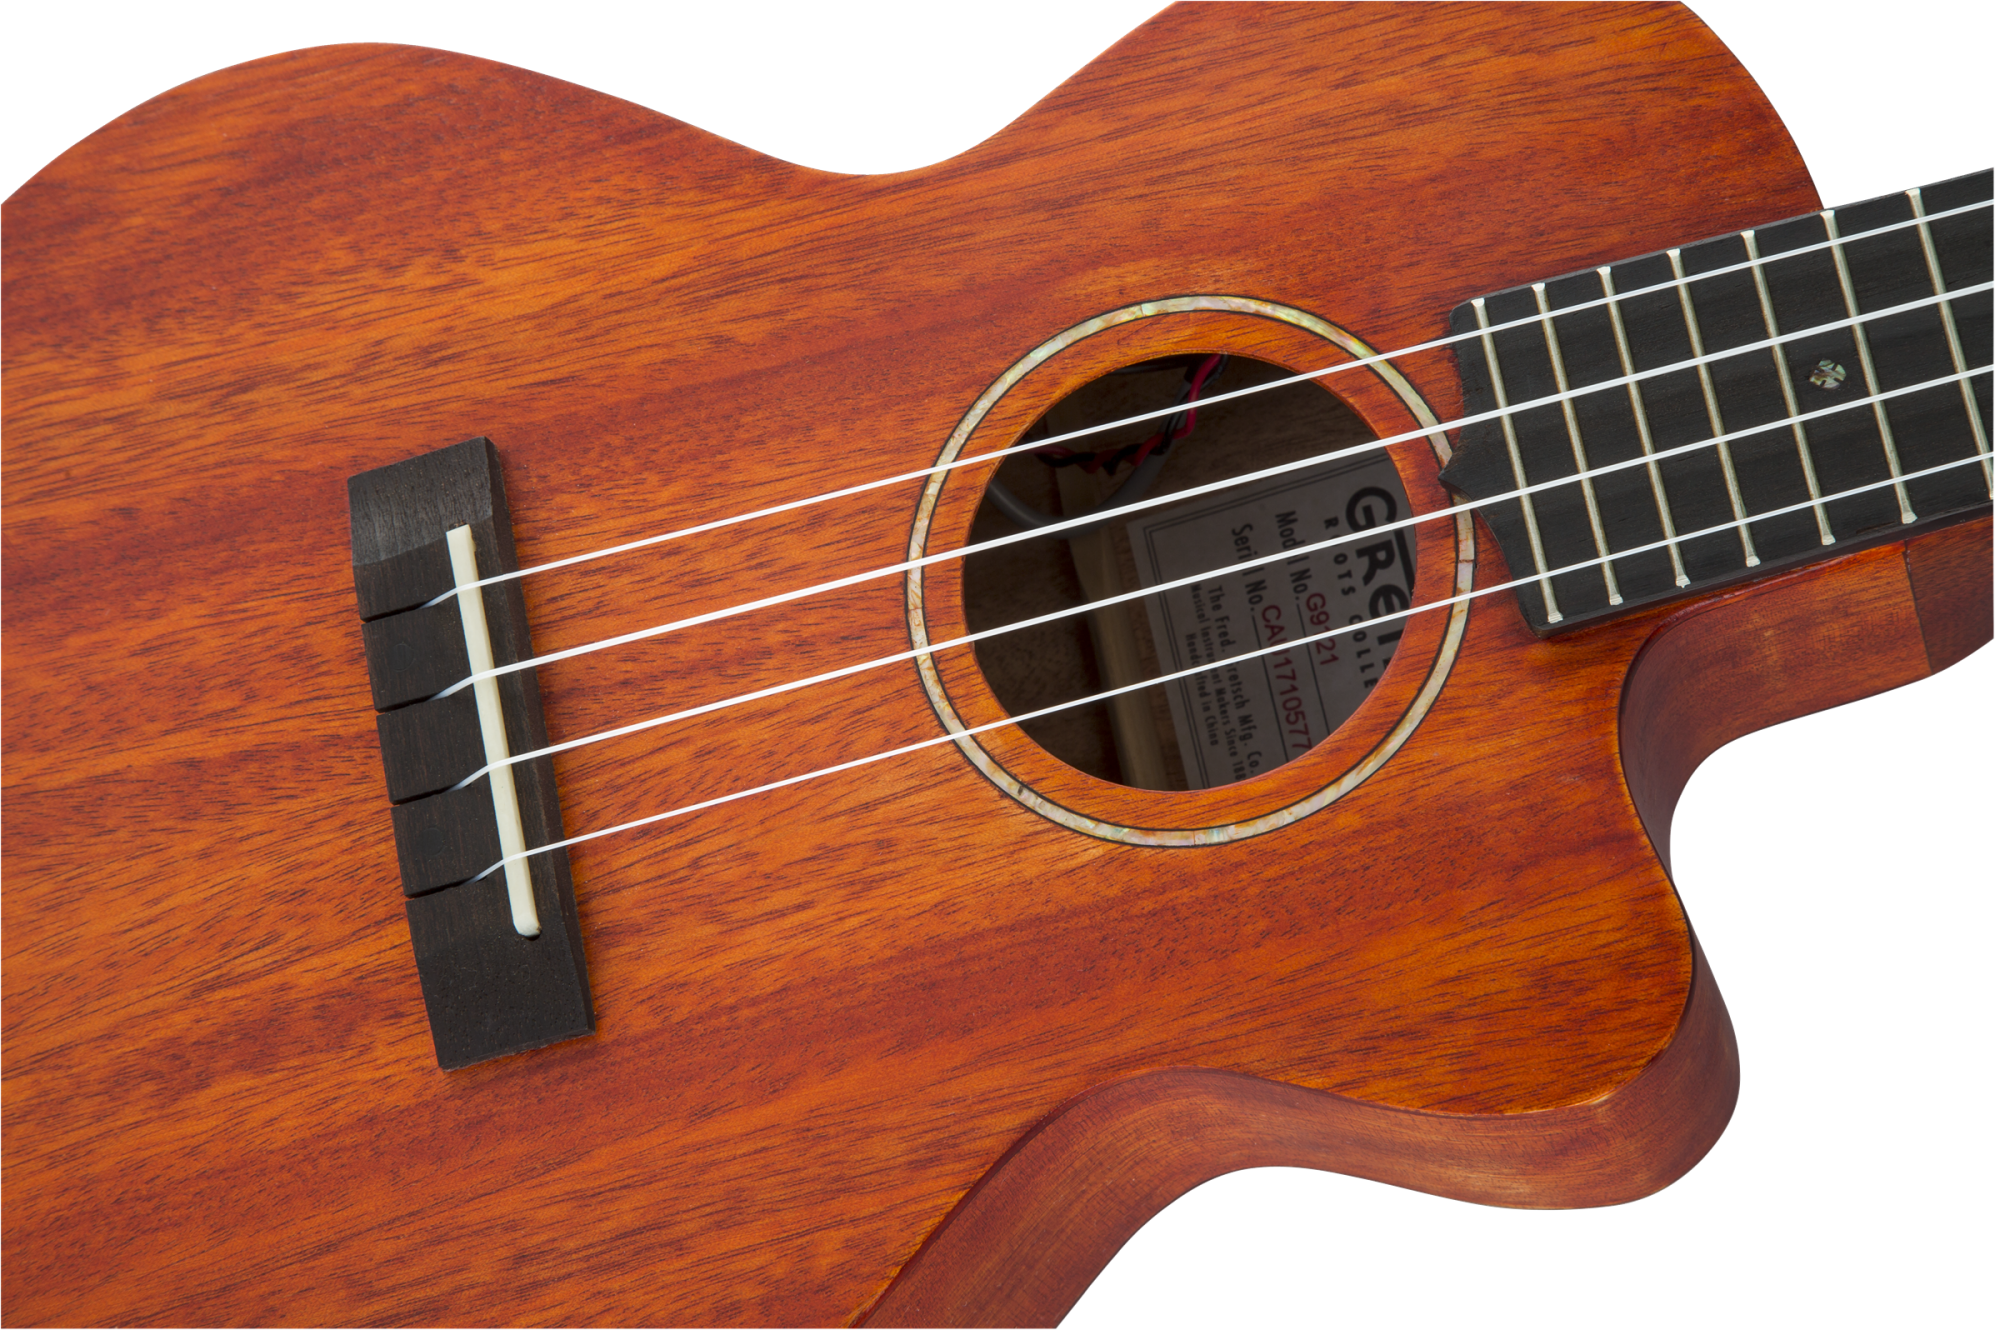 Gretsch G9121 Tenor Acoustic Electric Ukulele with Cutaway - Honey Mahogany Stain